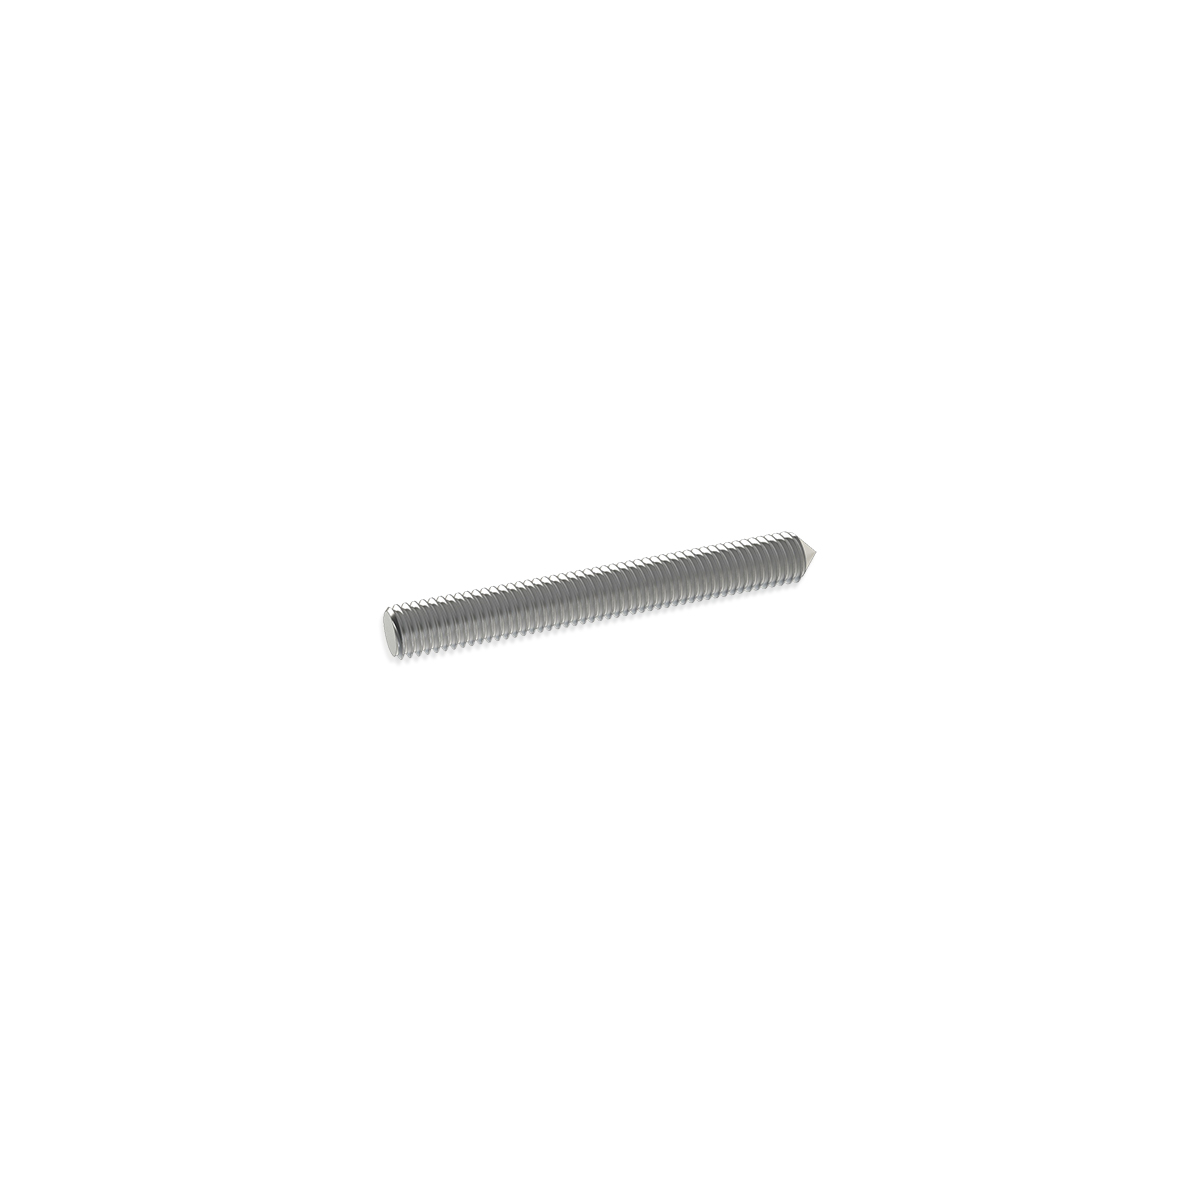 0.11'' Diameter X 2'' Long, Stainless Steel 4-40 Threaded Stud (1 End Flat - 1 End Conical)